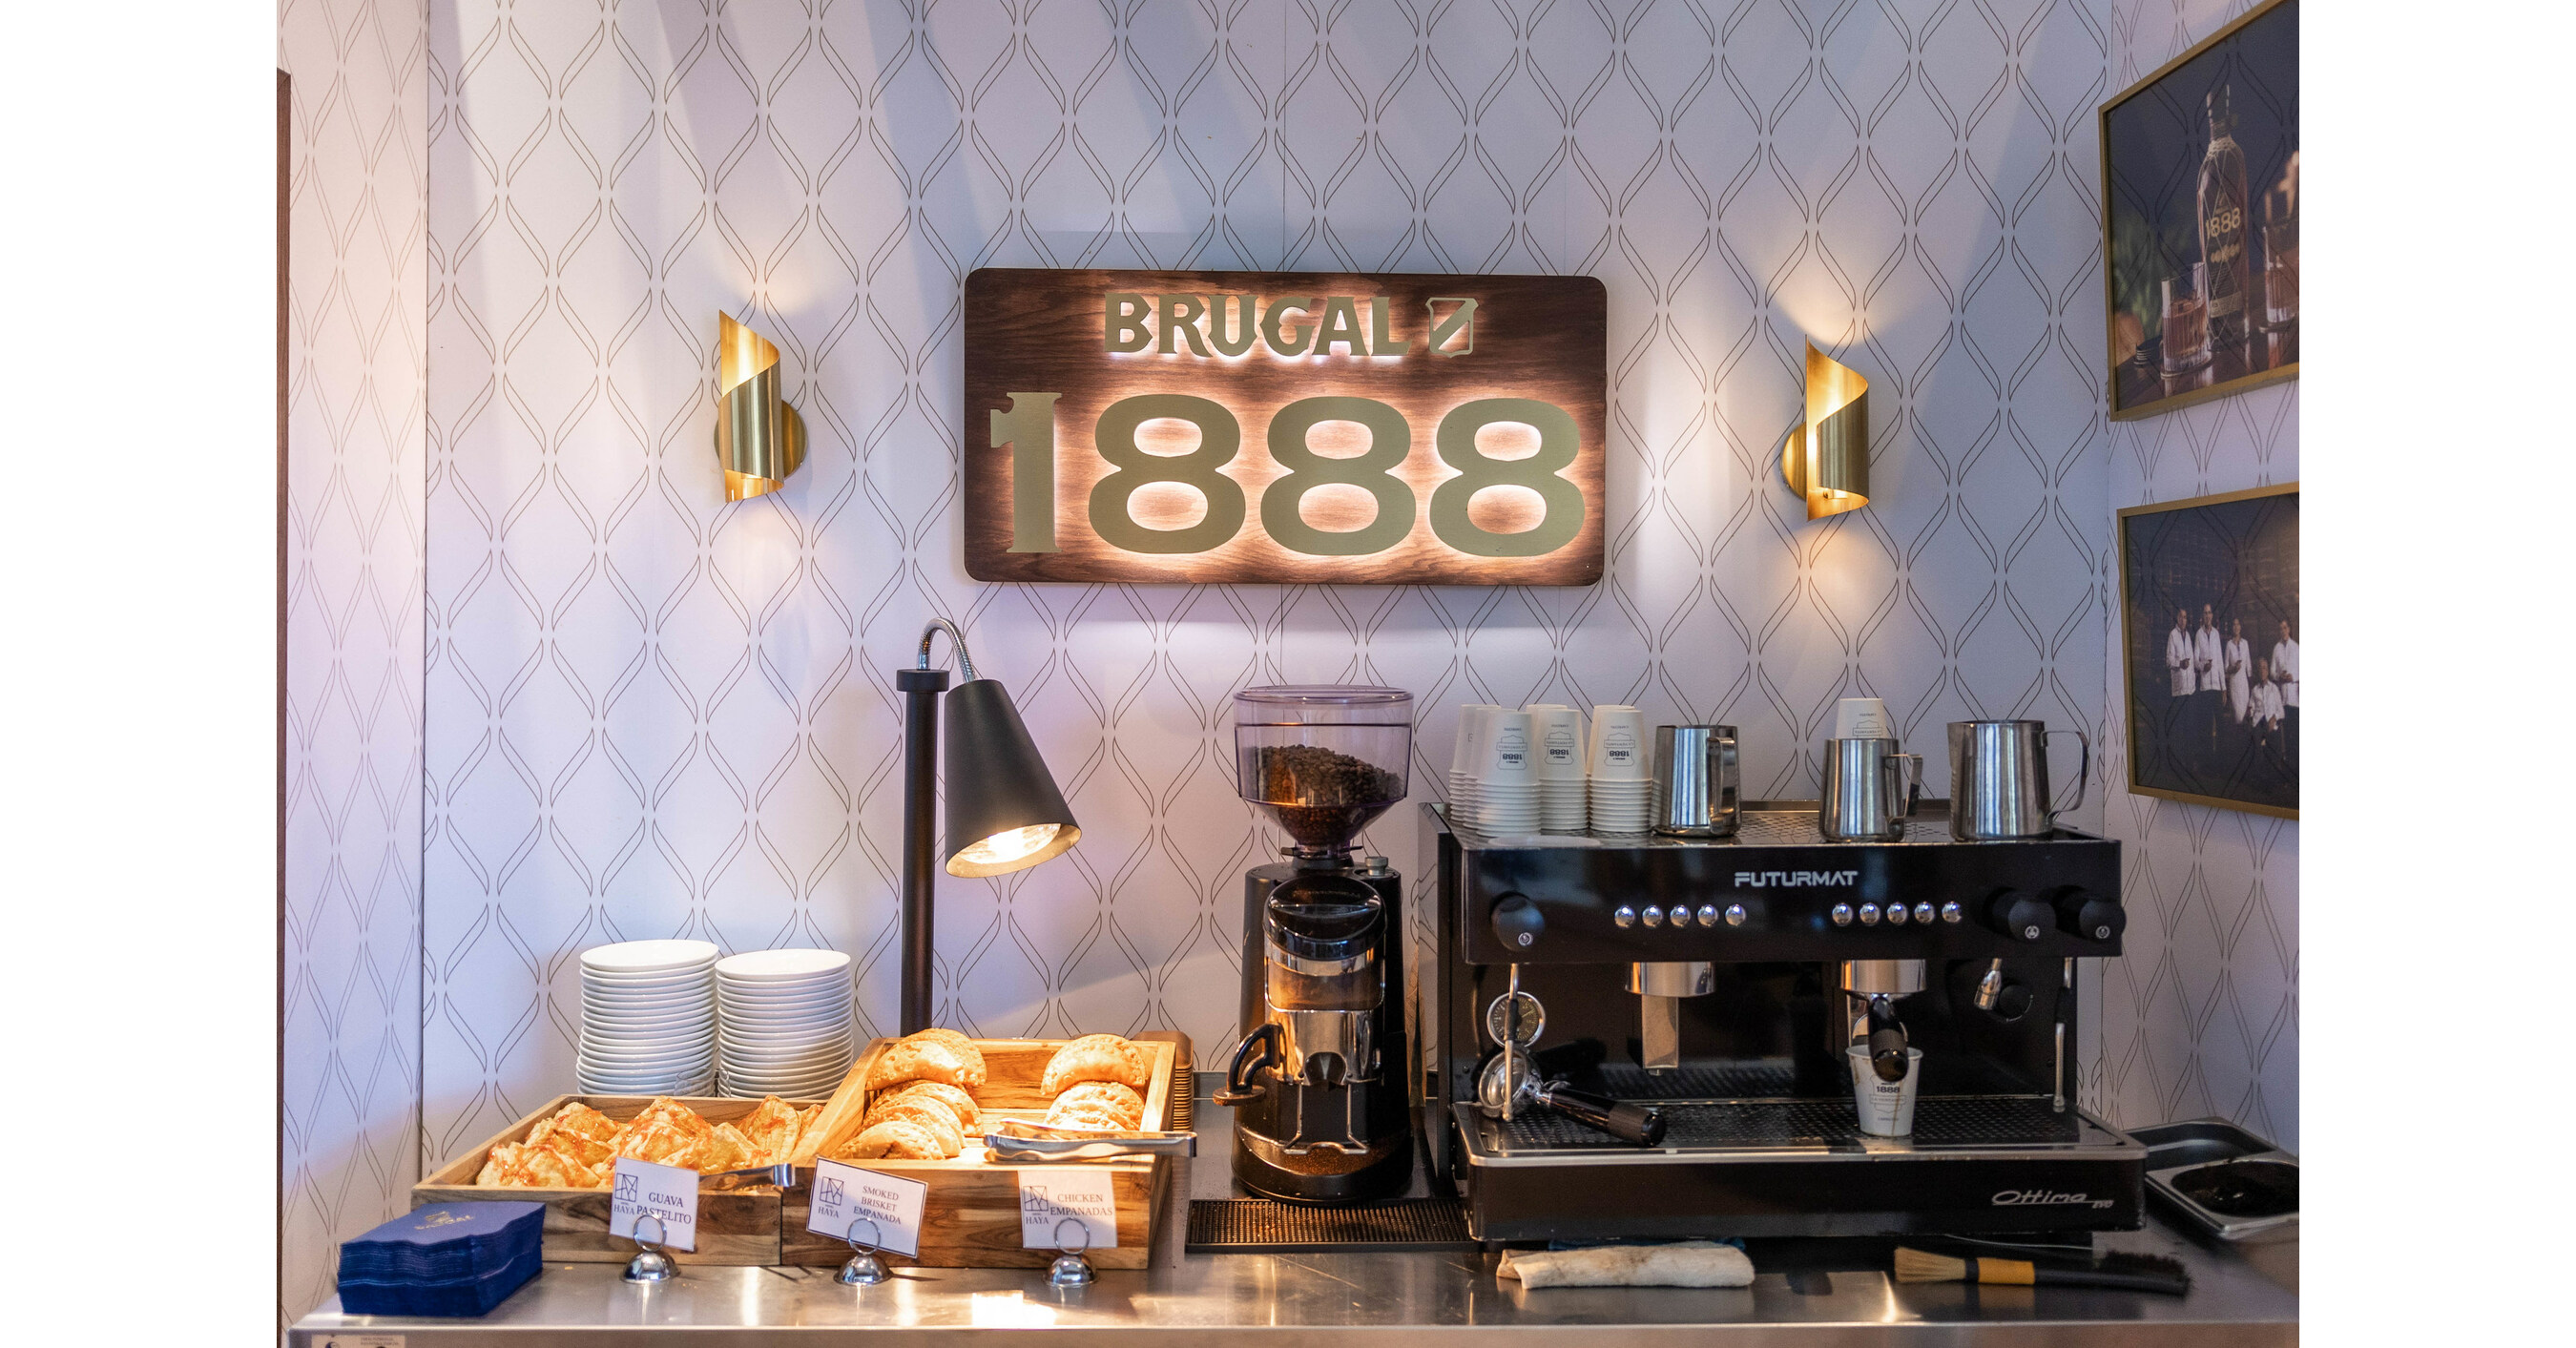 Experience Journeying the Announces Mobile Return With 1888 New La Across Florida of Ventanita\' Await at Brugal \'Wonders